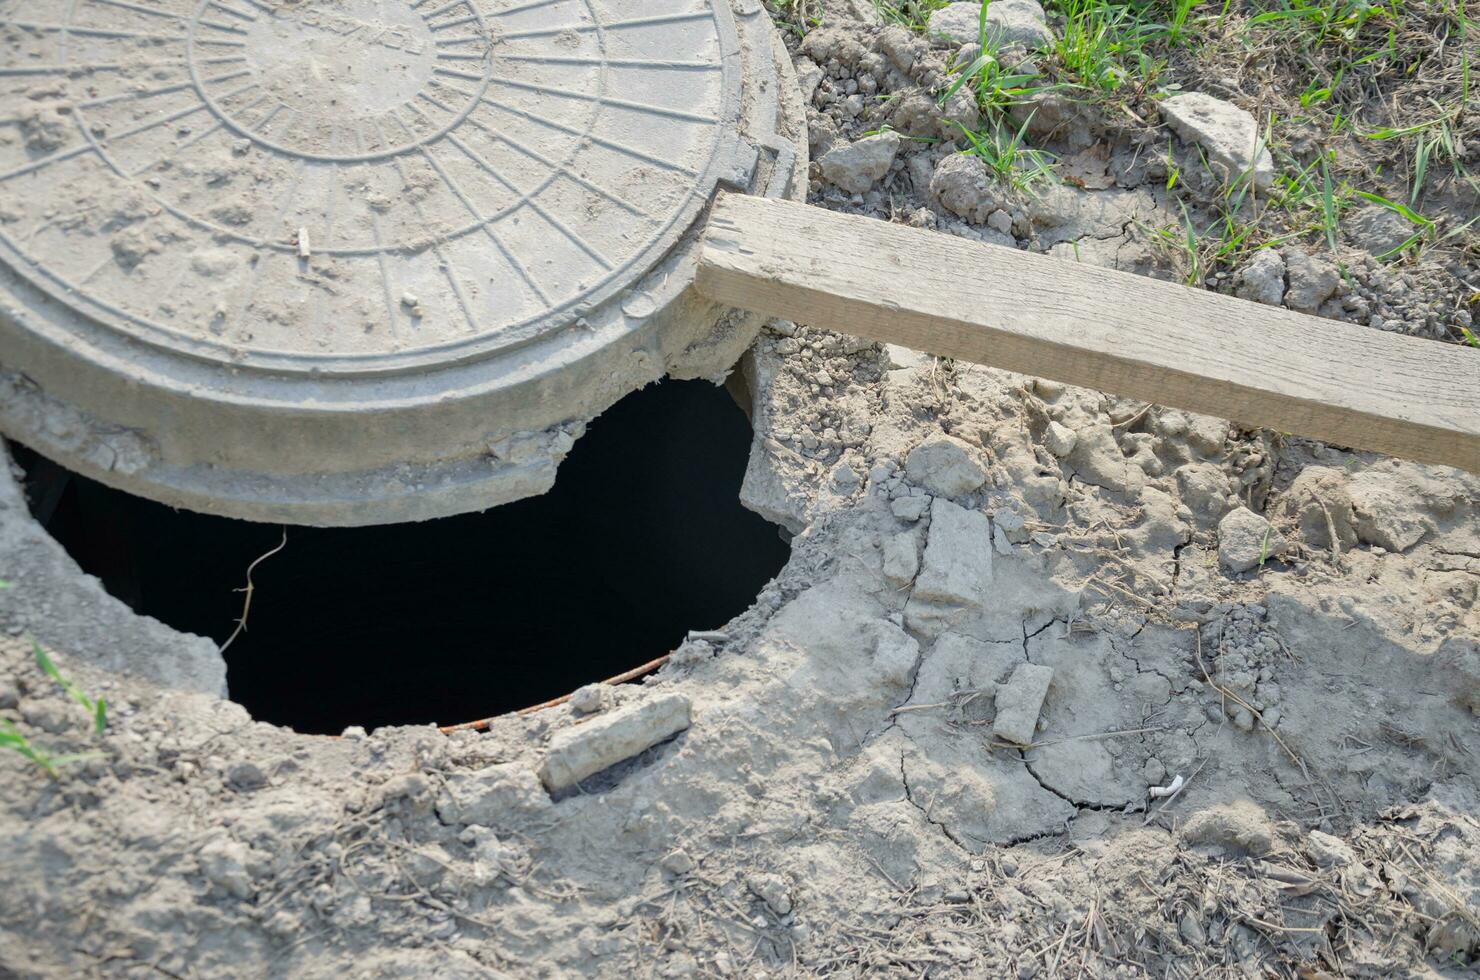 The hatch on the ground is open, the hole in the ground photo